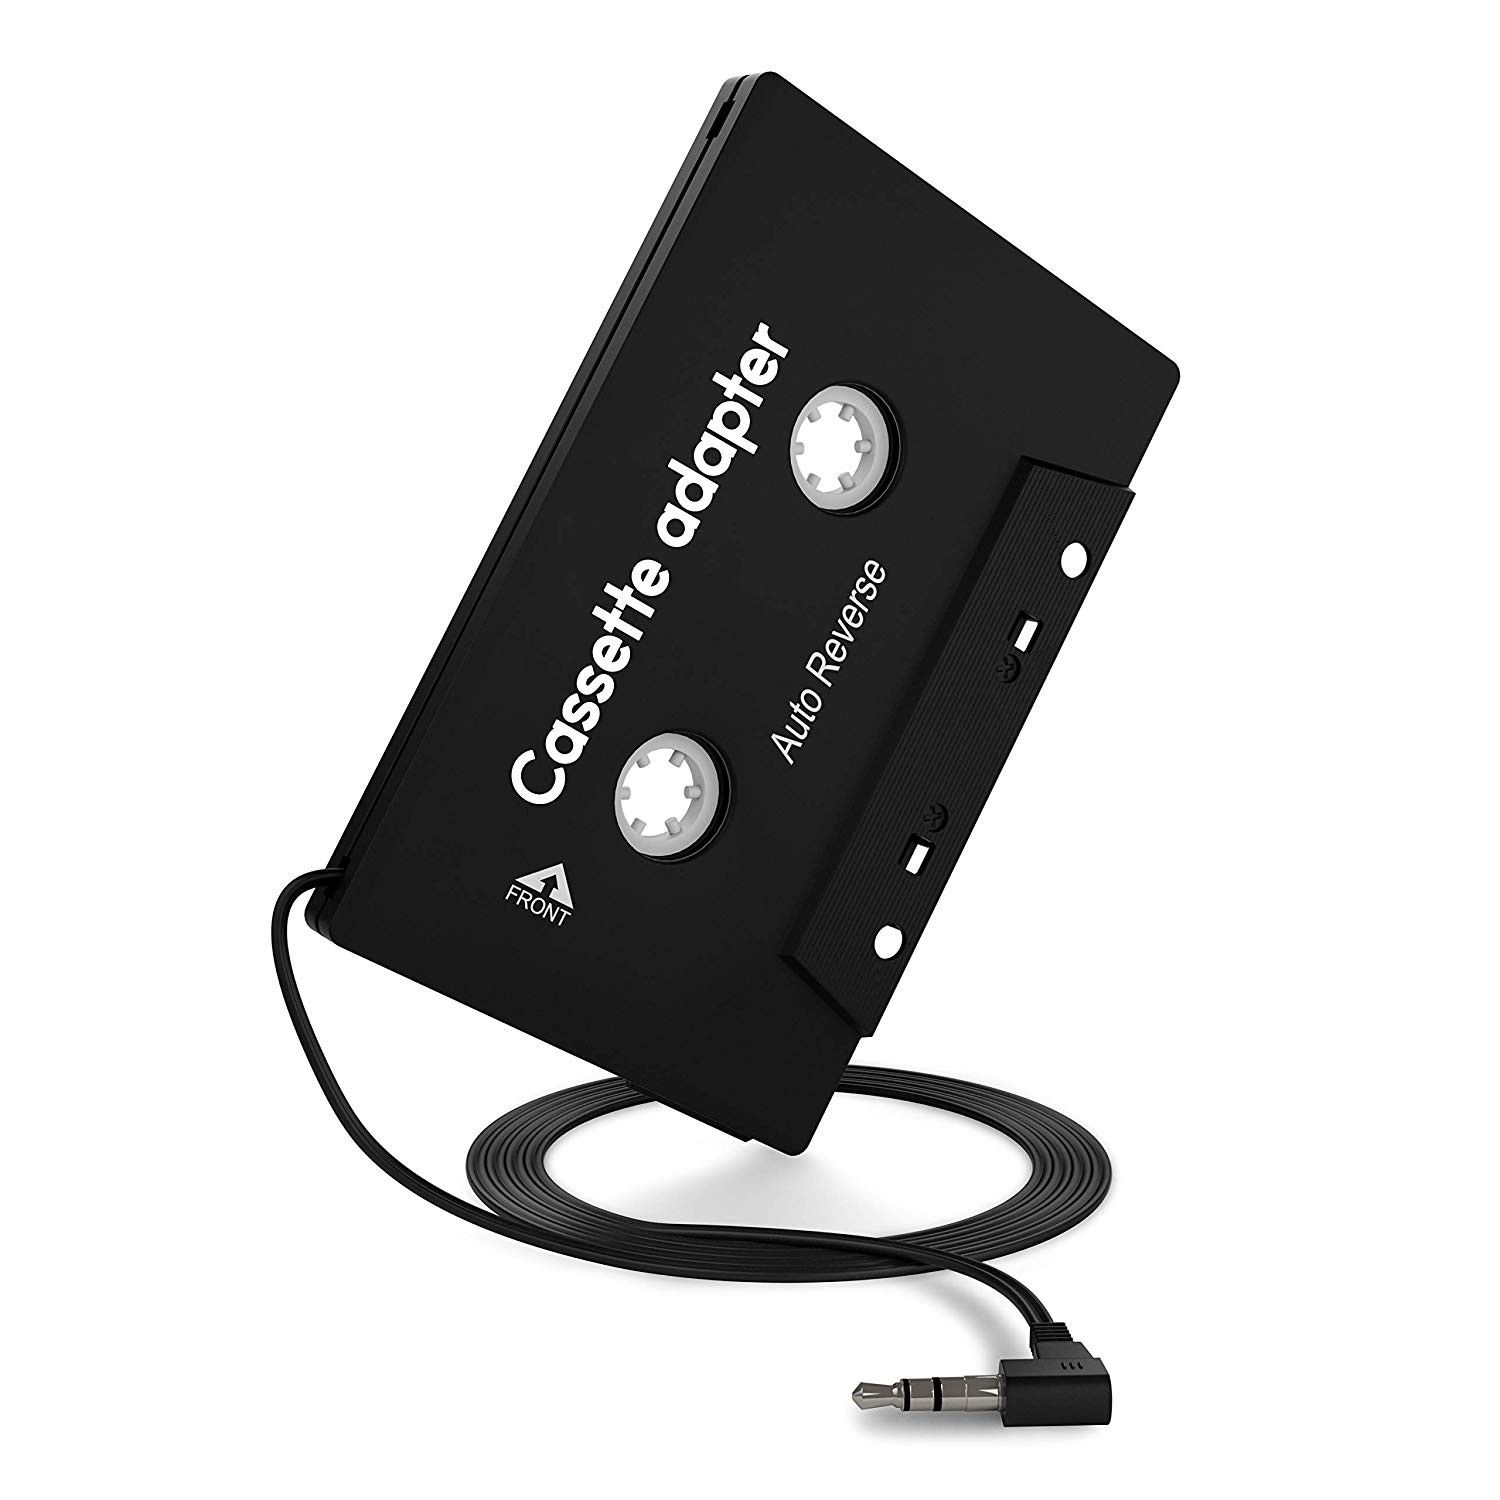 Car 3.5 mm universal audio cassette adapter for iPhone Android Smartphone with Stereo Plug